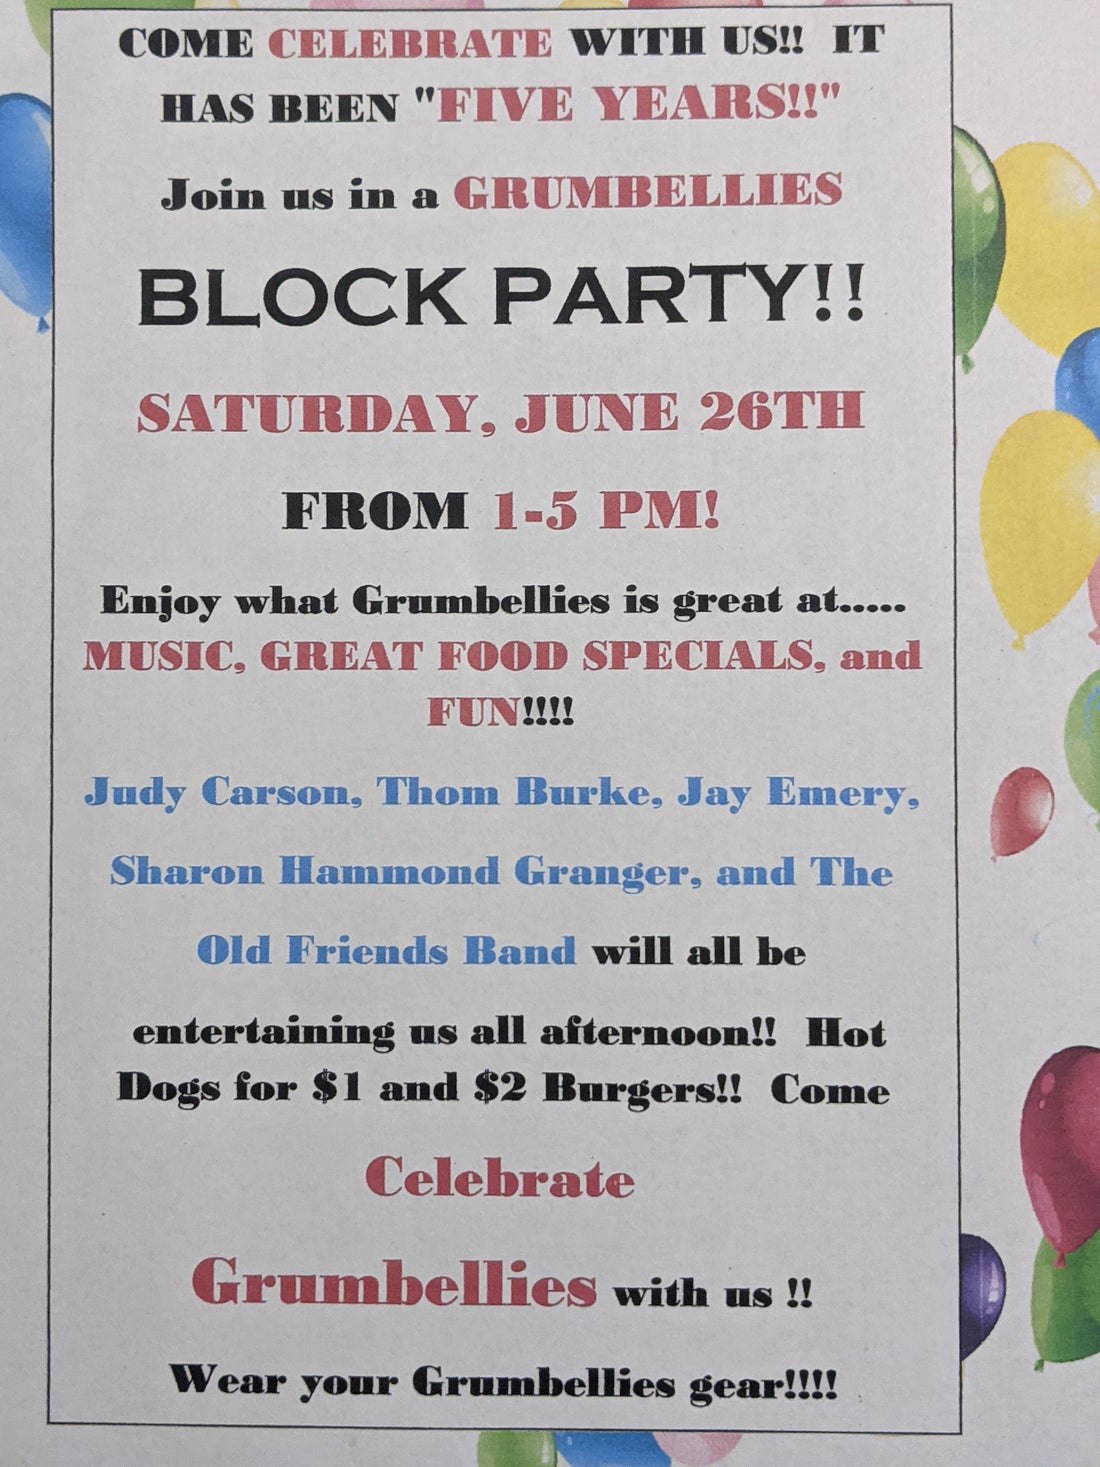 Block Party is coming on June 26 2021